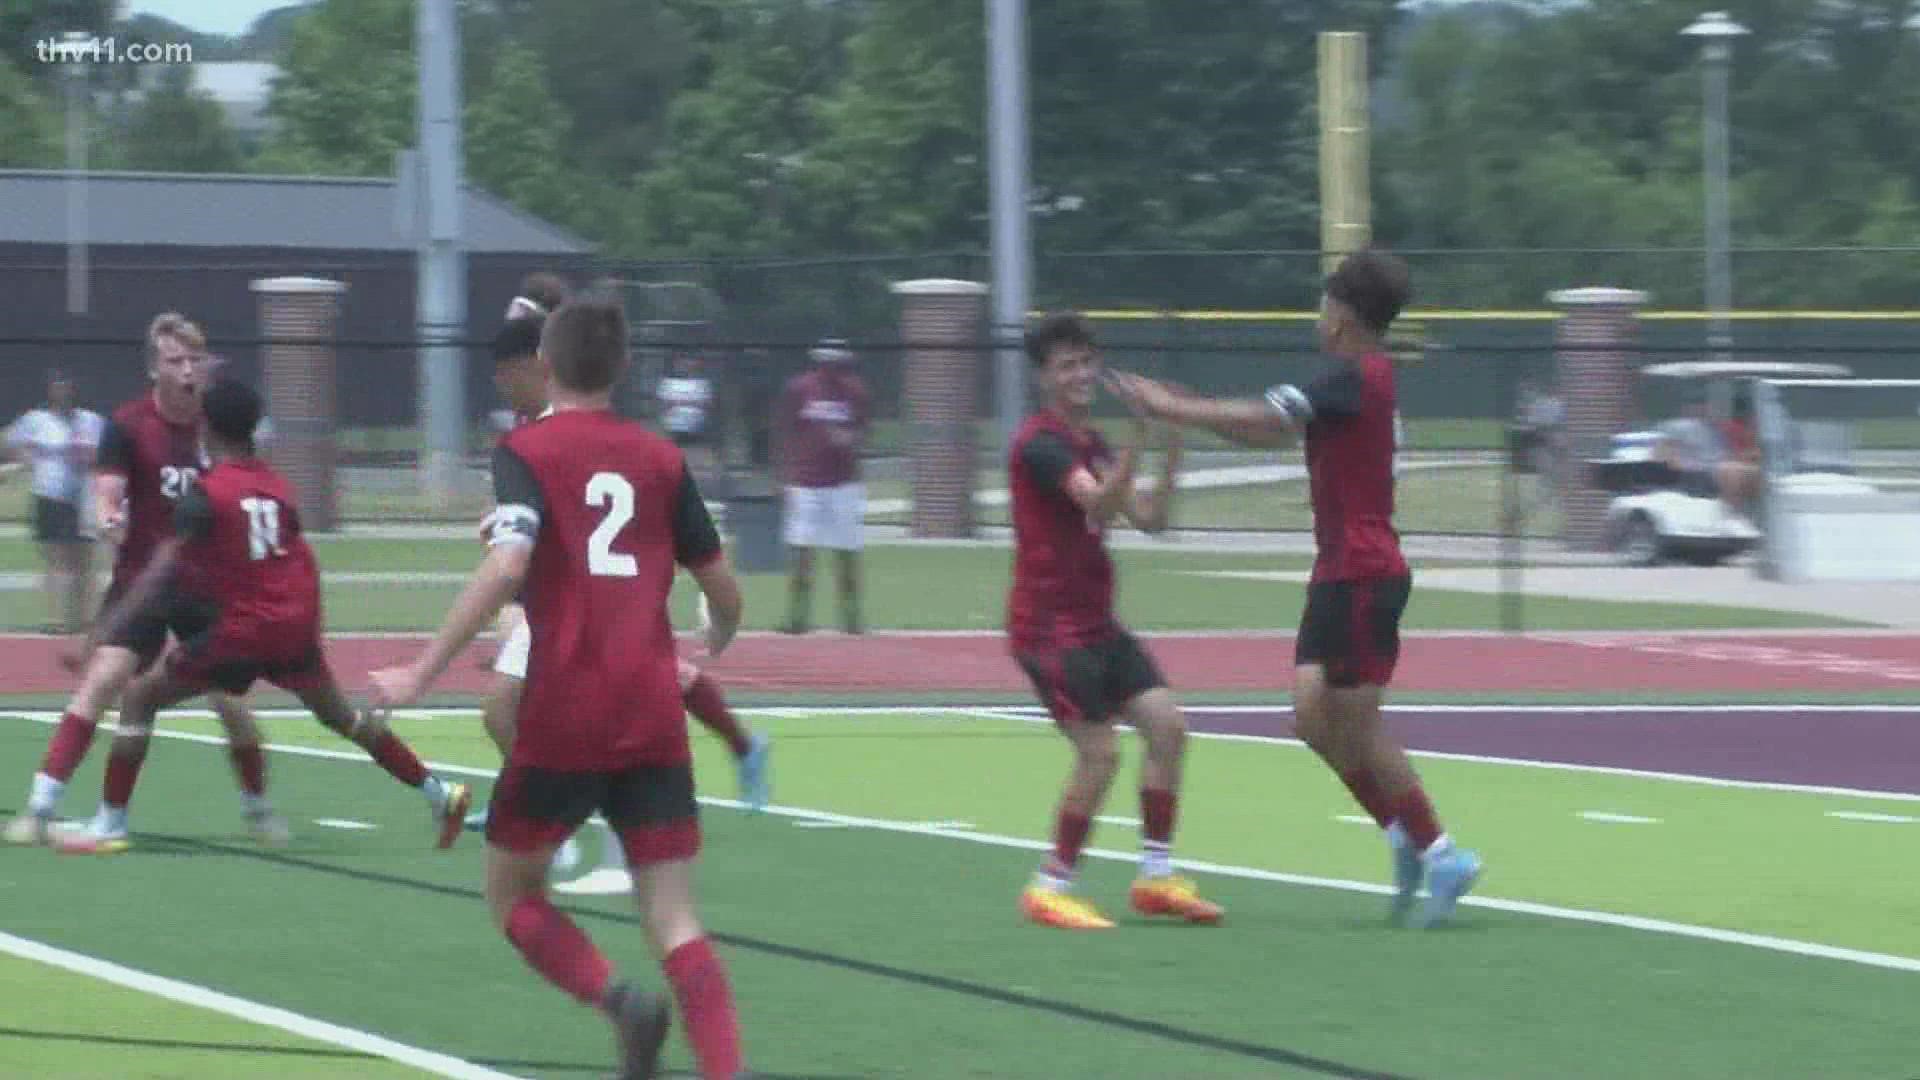 Russellville defeated Van Buren 4-0 for the 5A boys state soccer championship